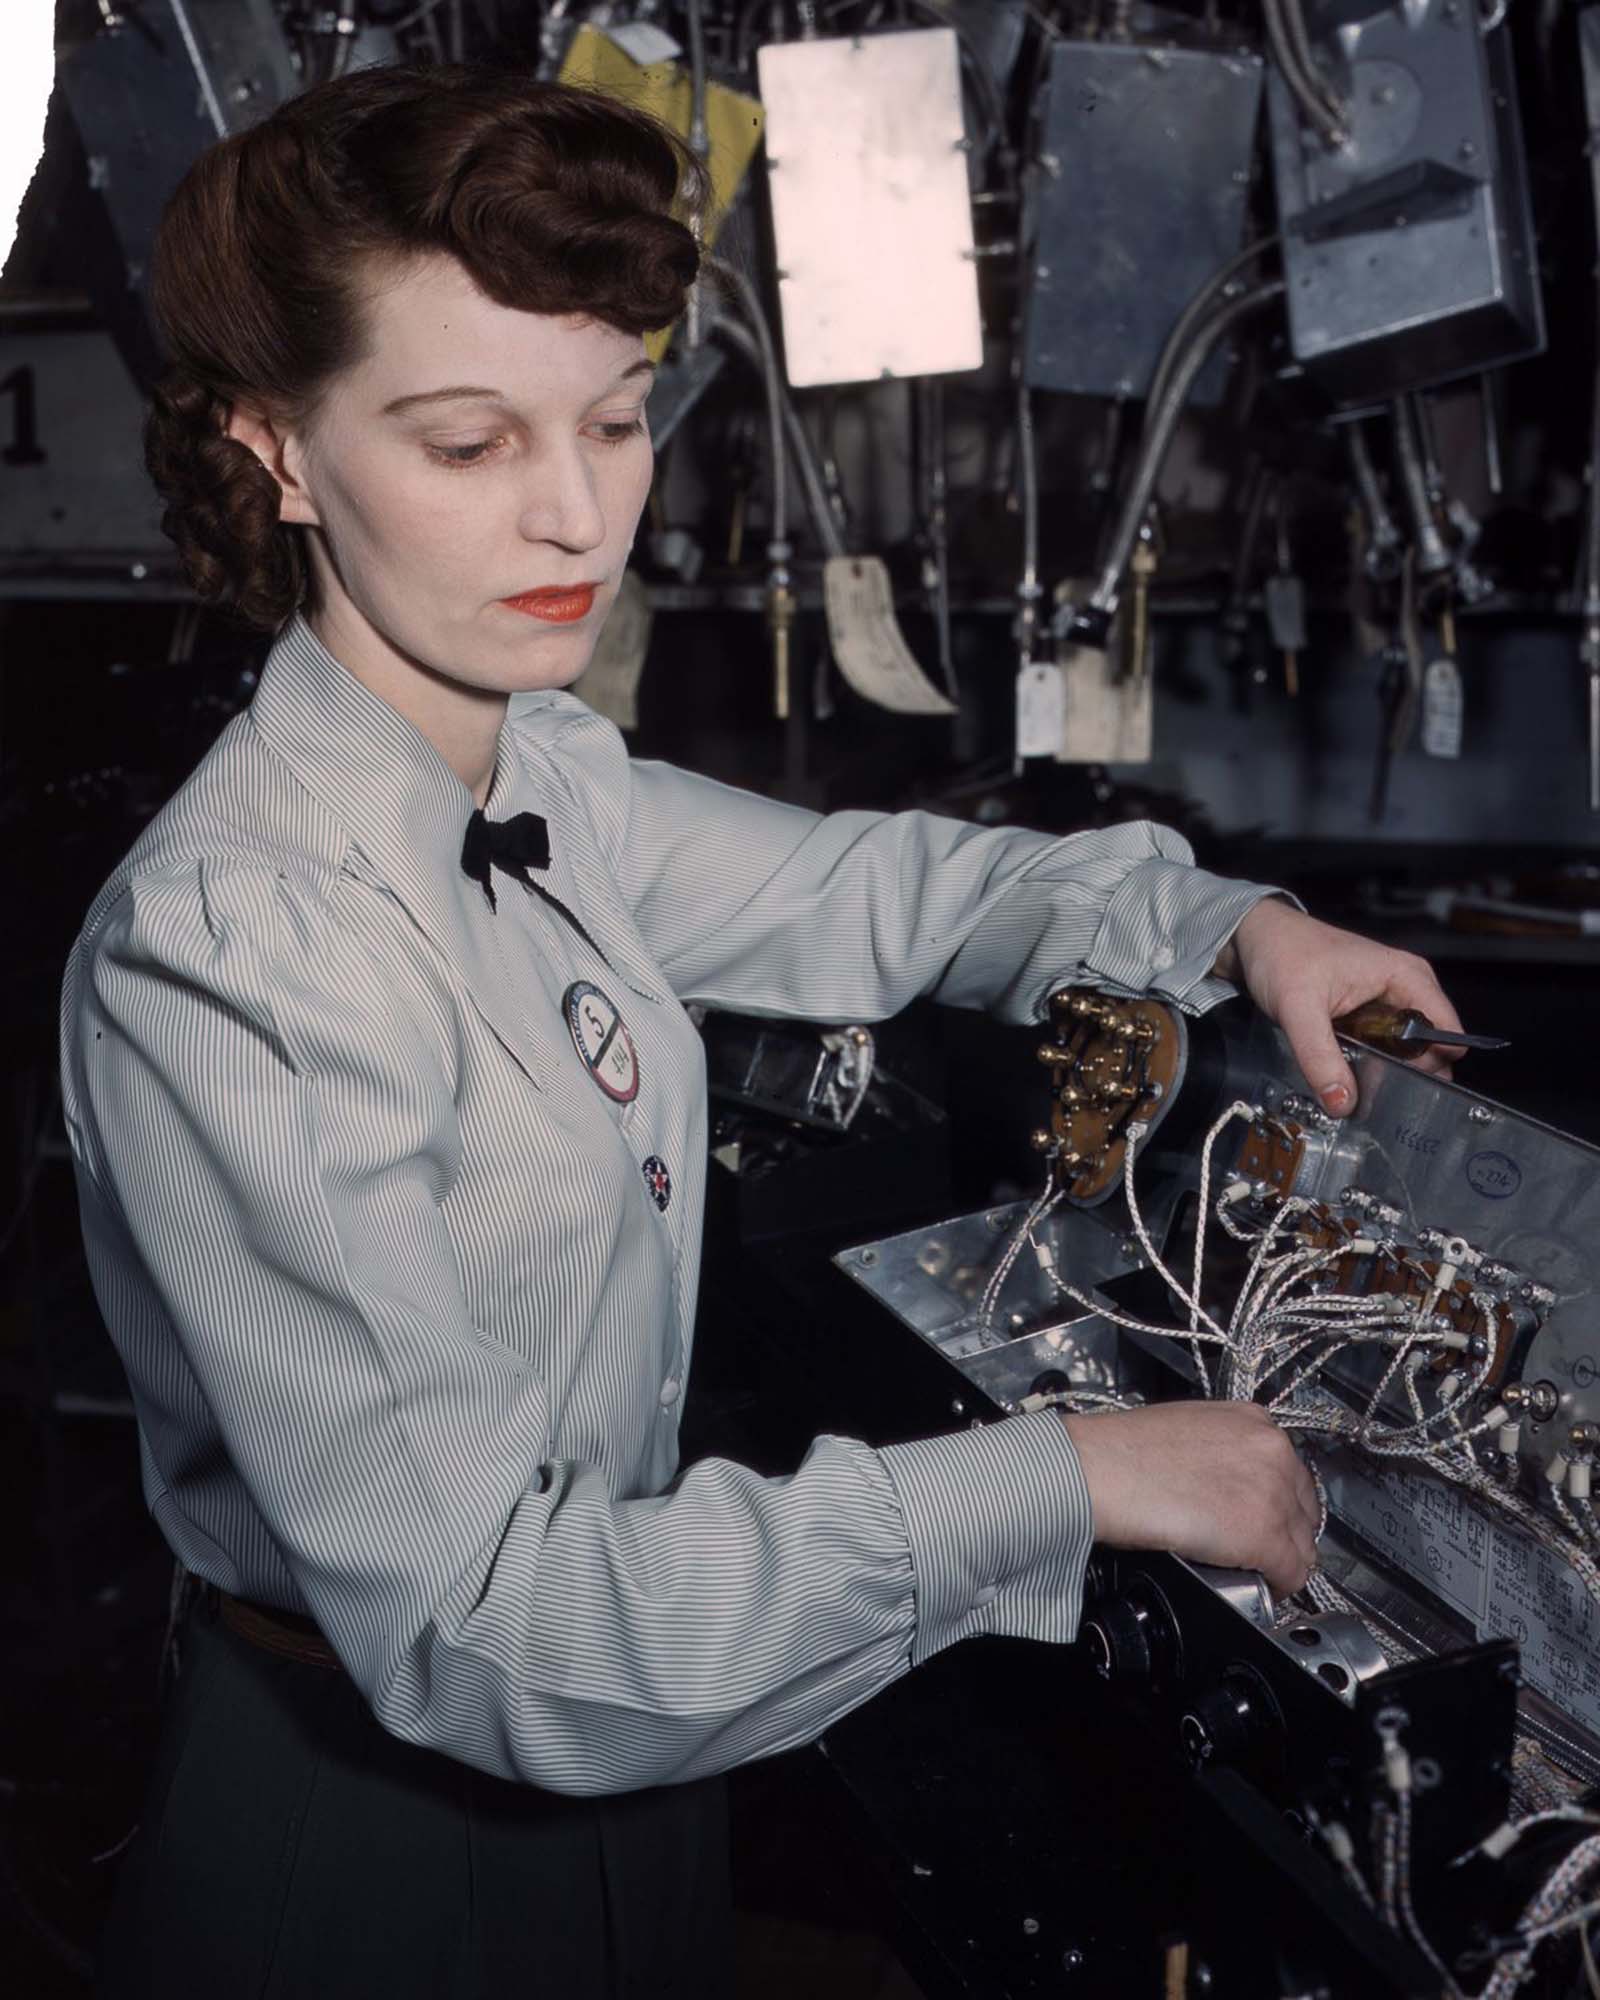 An electronics technician at the Goodyear Aircraft Corporation in Akron, Ohio, 1941.